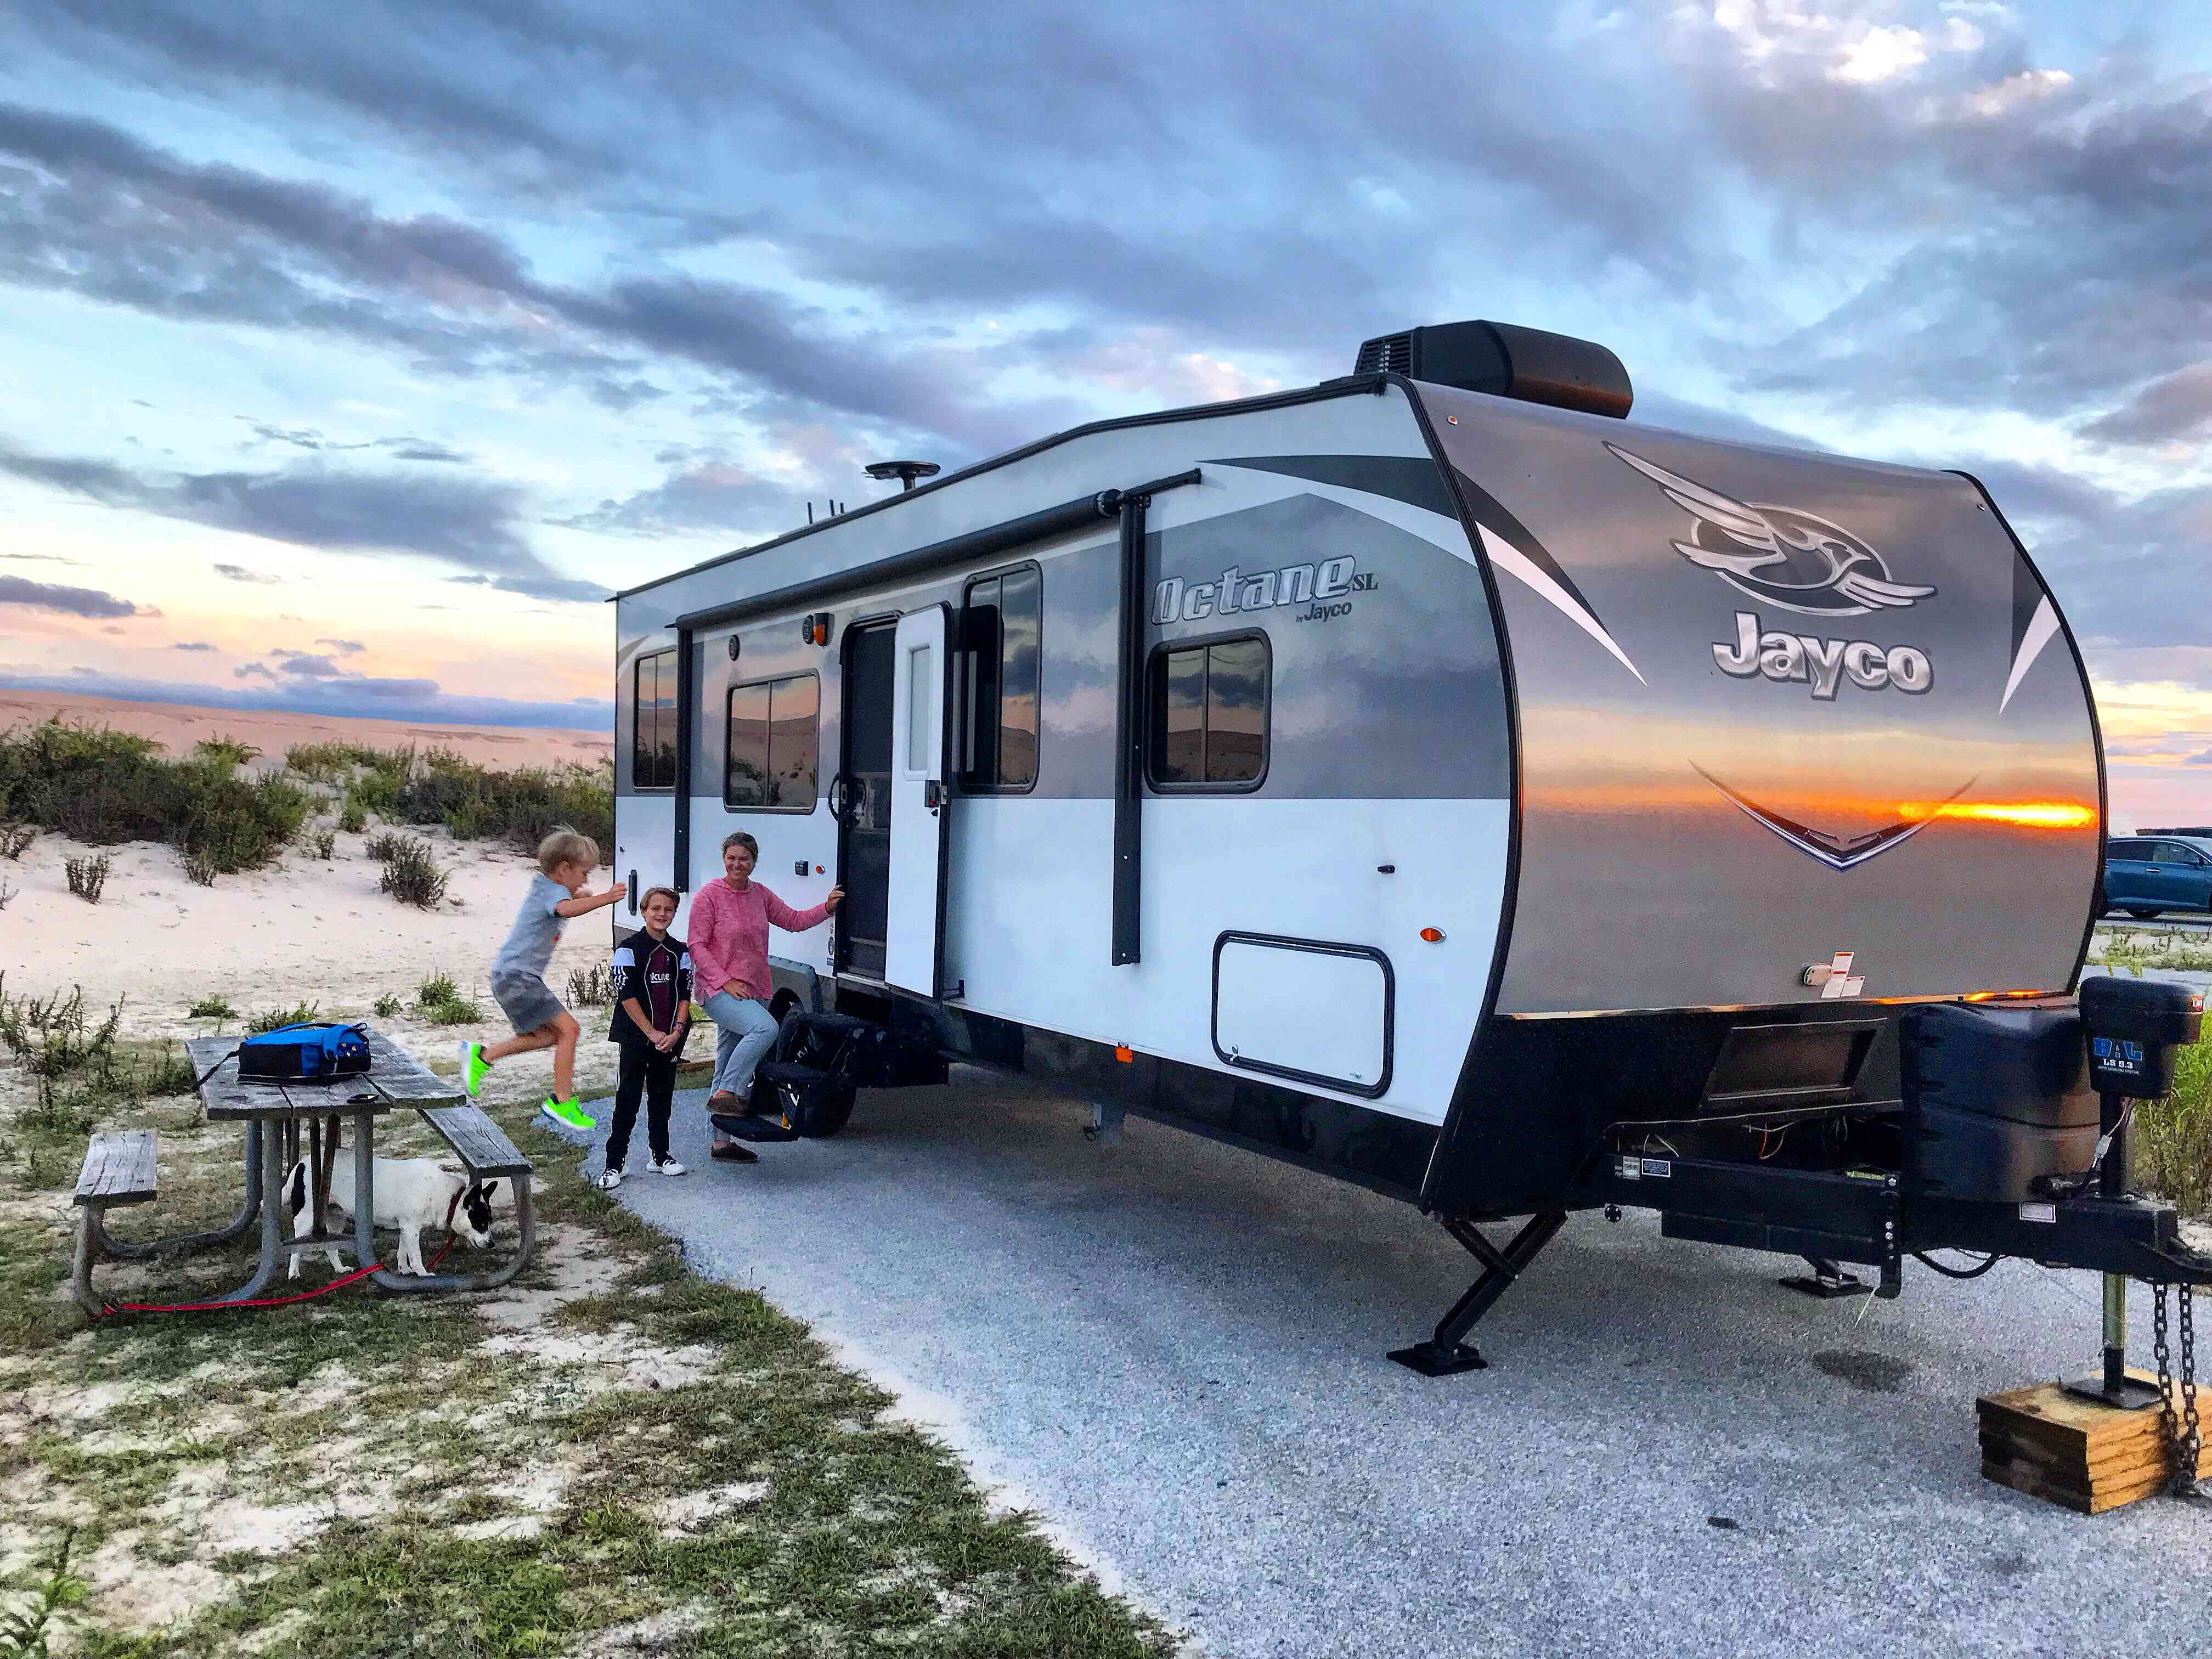 Travel Trailer at campground